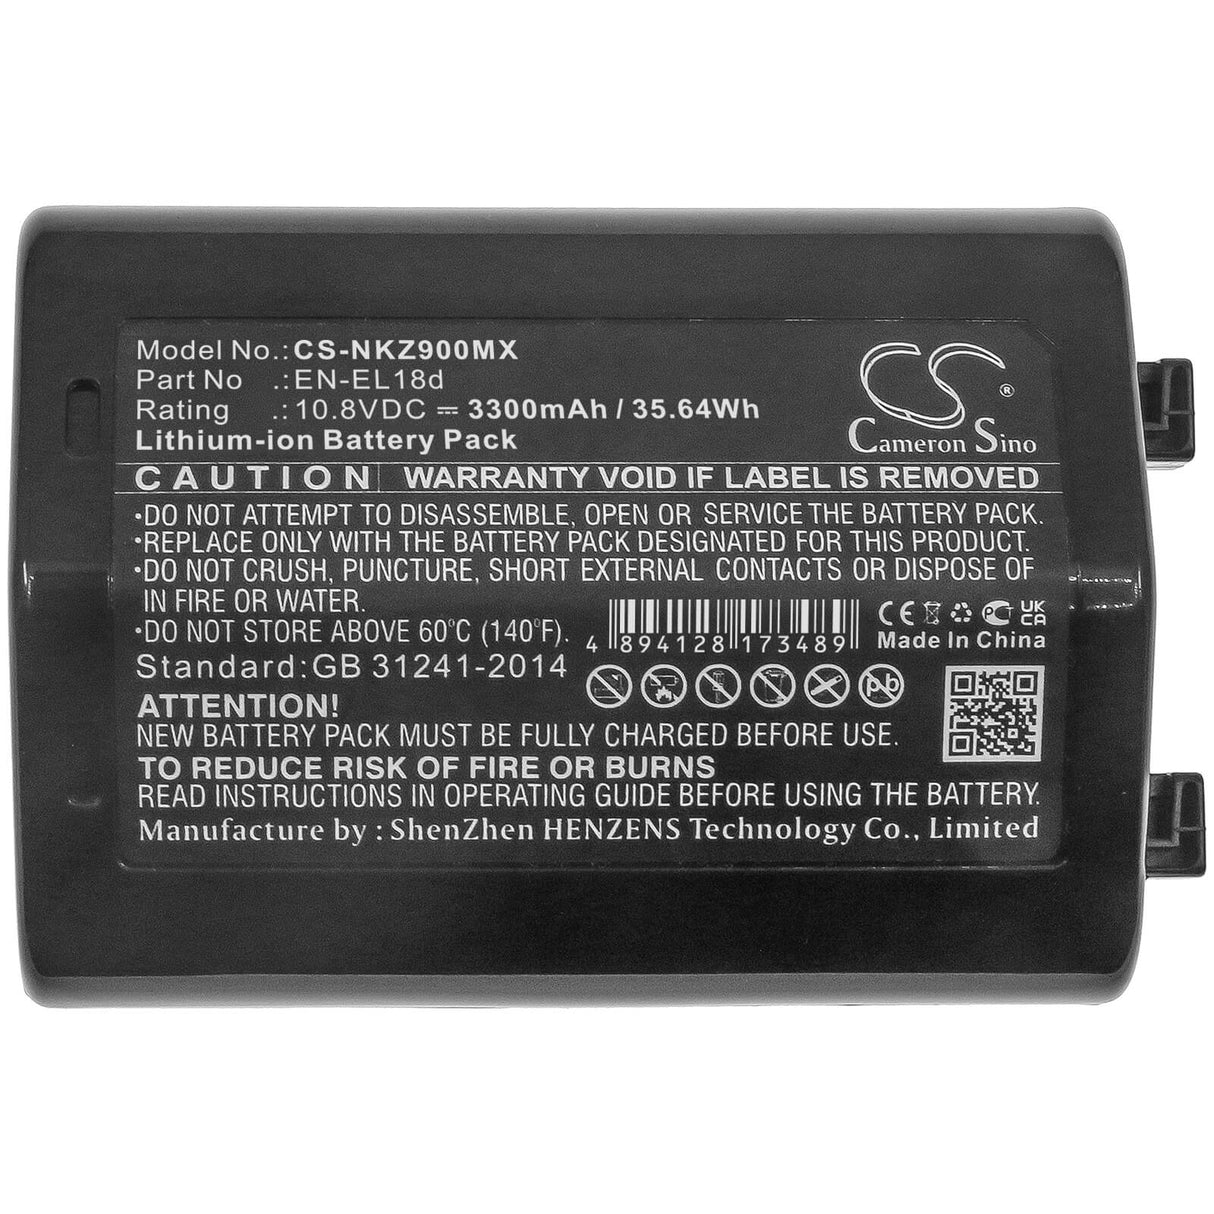 10.8v, 3300mah, Li-ion Battery Fit's Nikon, D6, Z9, 35.64wh Batteries for Electronics Cameron Sino Technology Limited   